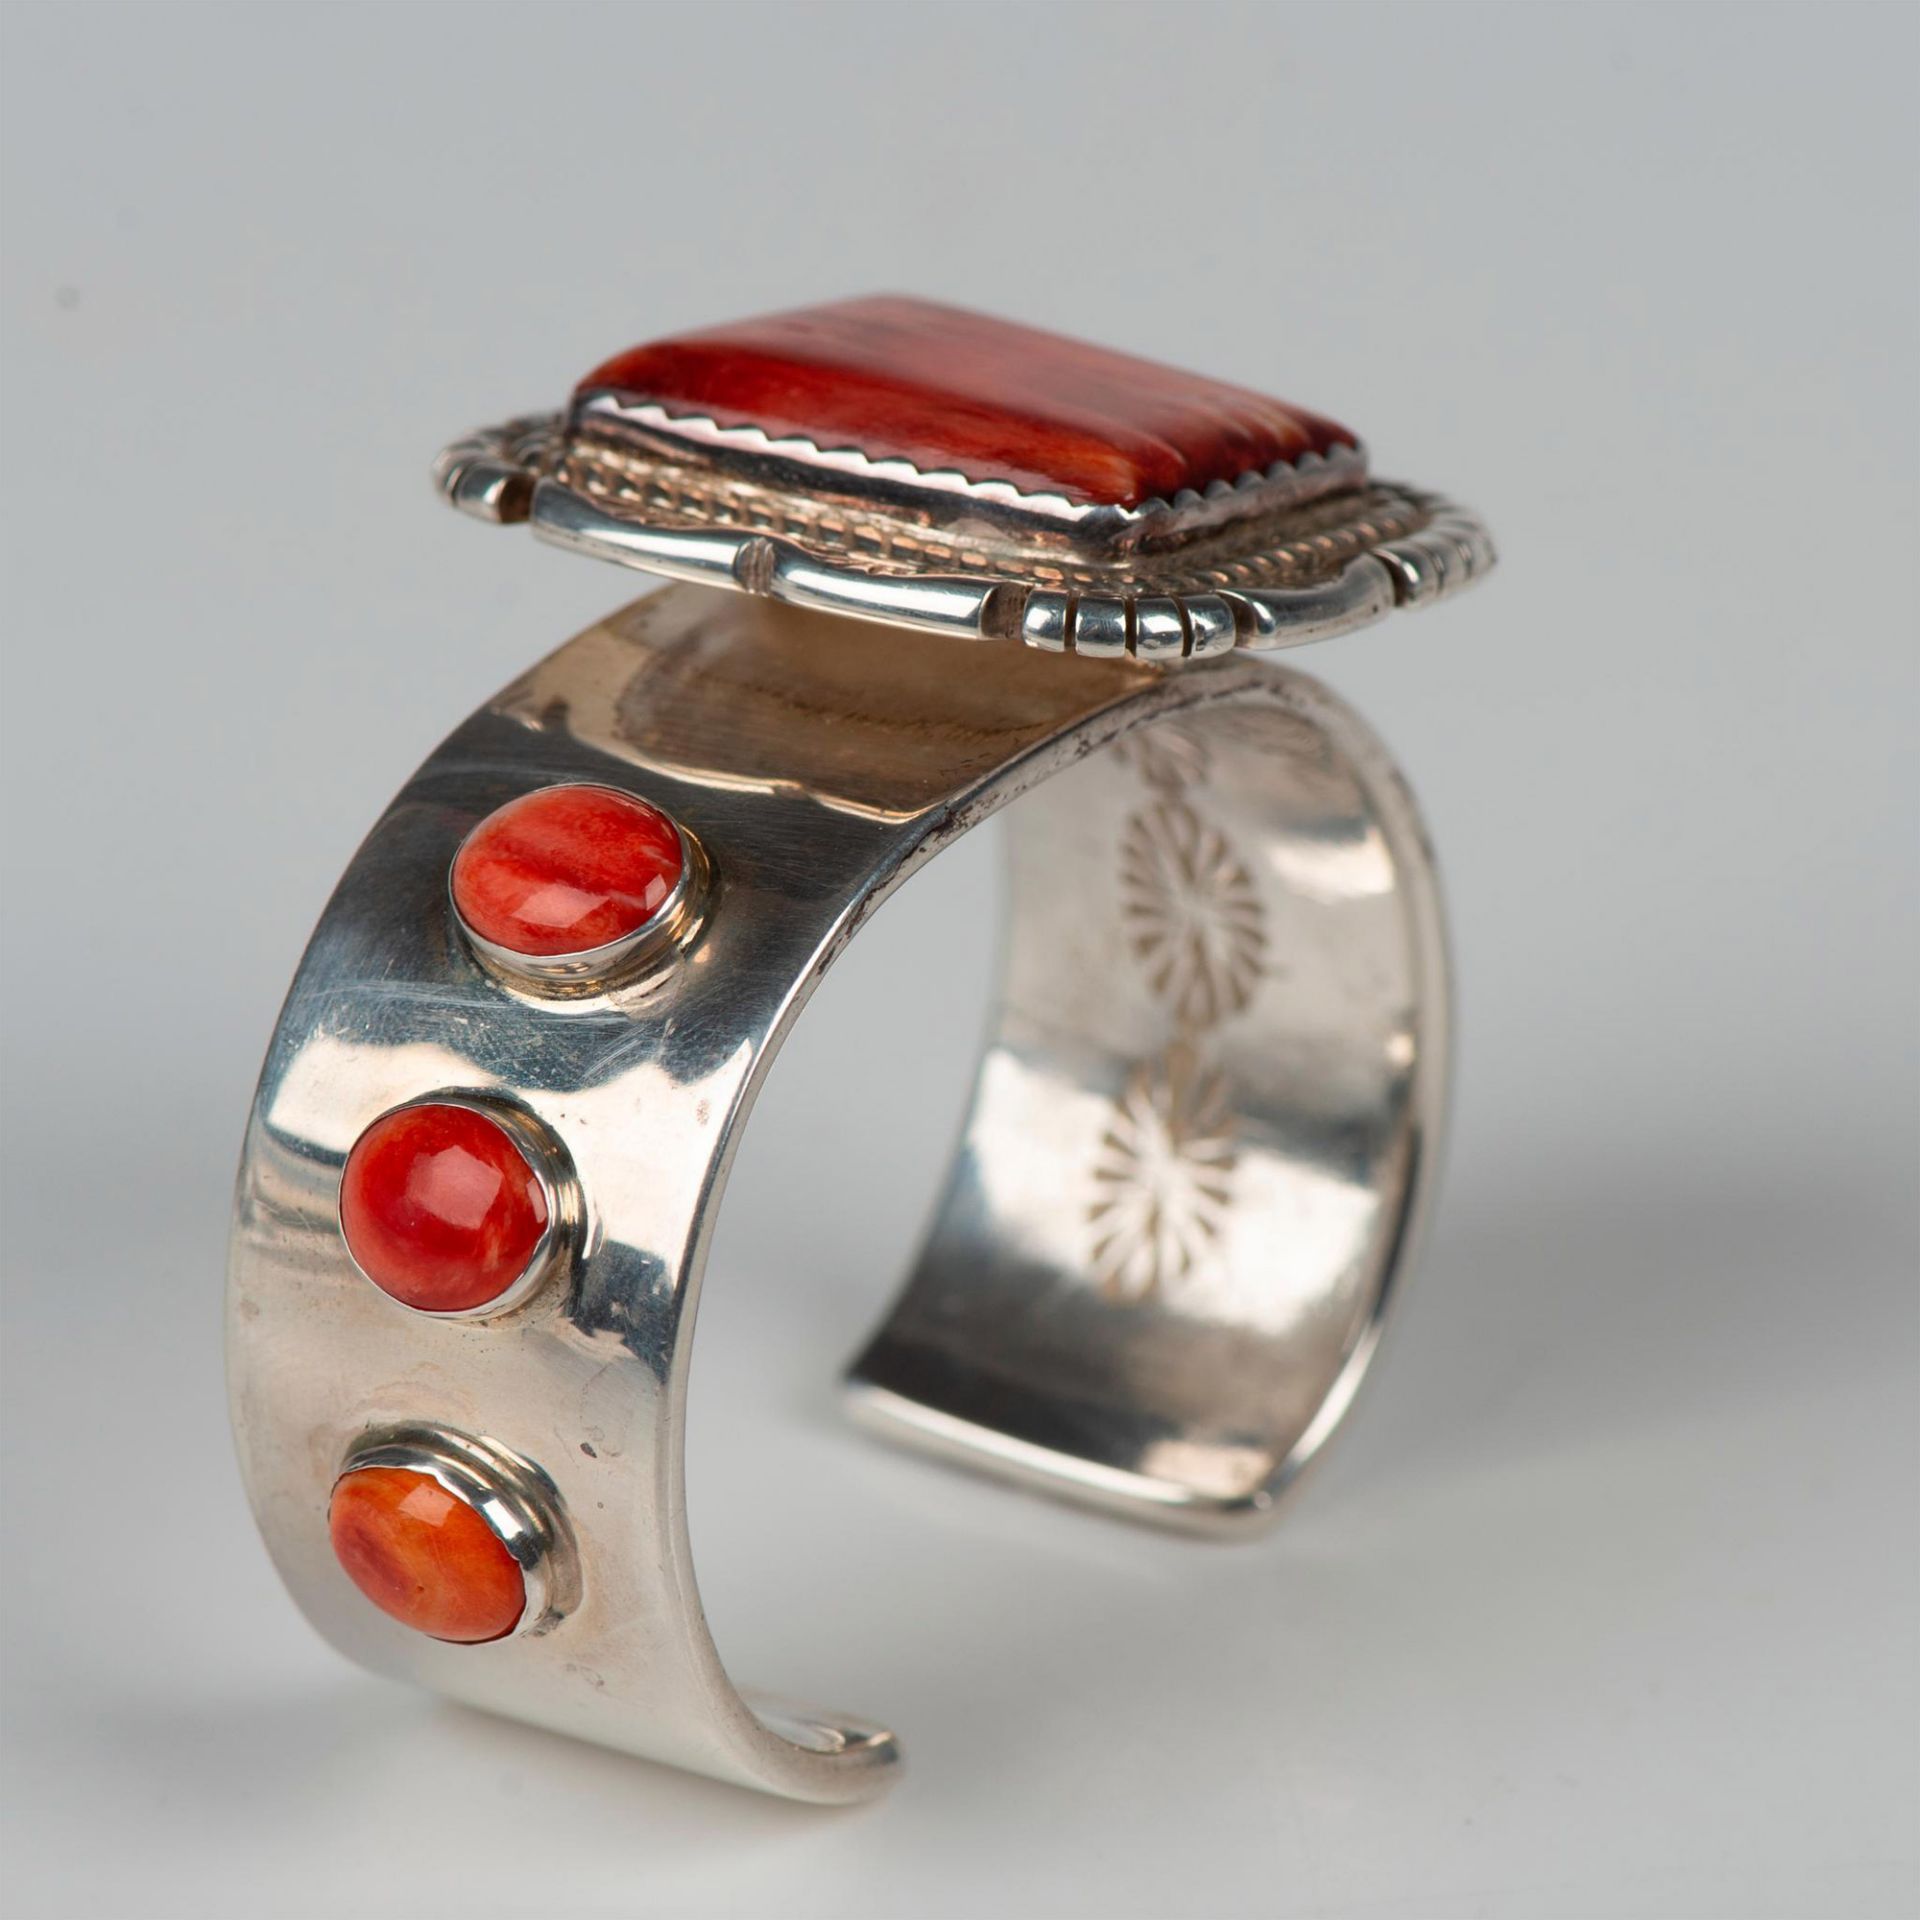 Ca'Win Pueblo Sterling Silver Red Spiny Oyster Cuff Bracelet - Image 5 of 7